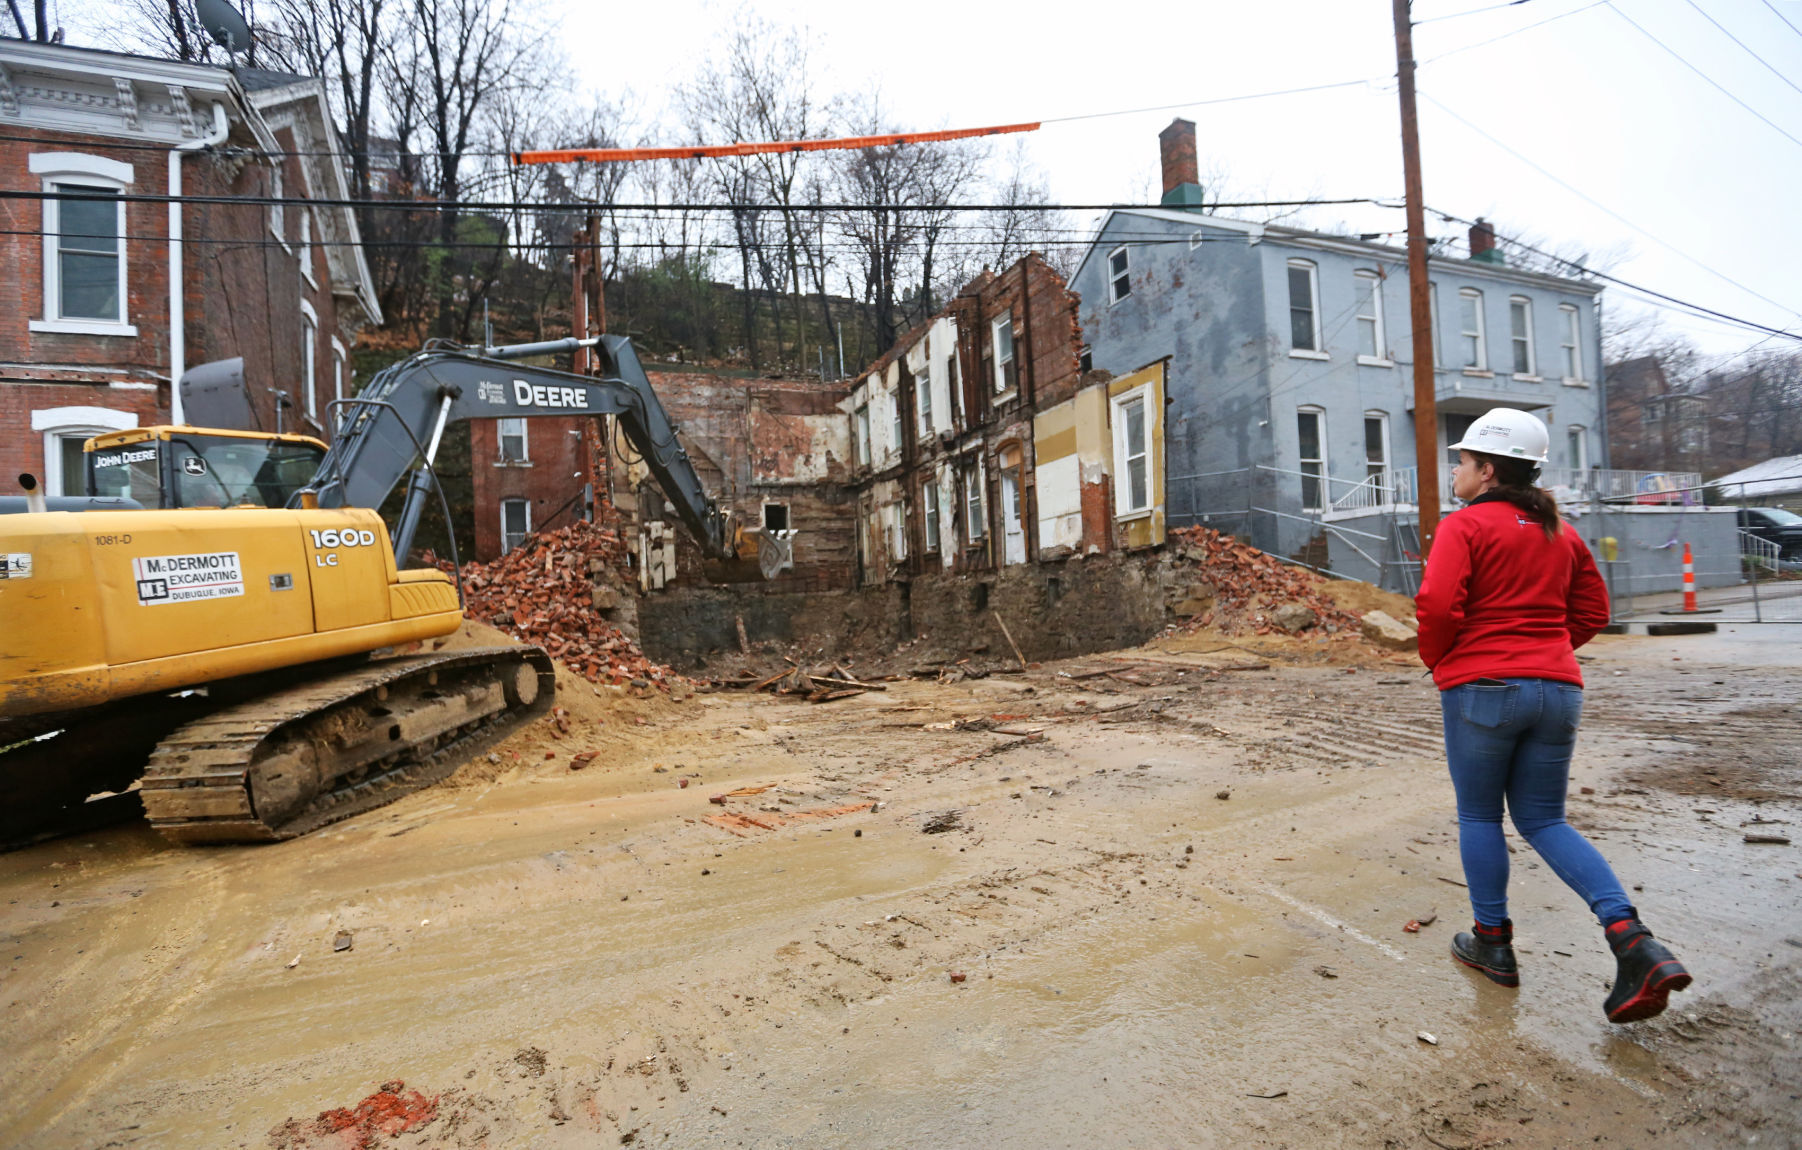 Tara Duggan, president and owner of McDermott Excavating, observes a job site at 1025 Bluff Street in Dubuque. PHOTO CREDIT: Jessica Reilly